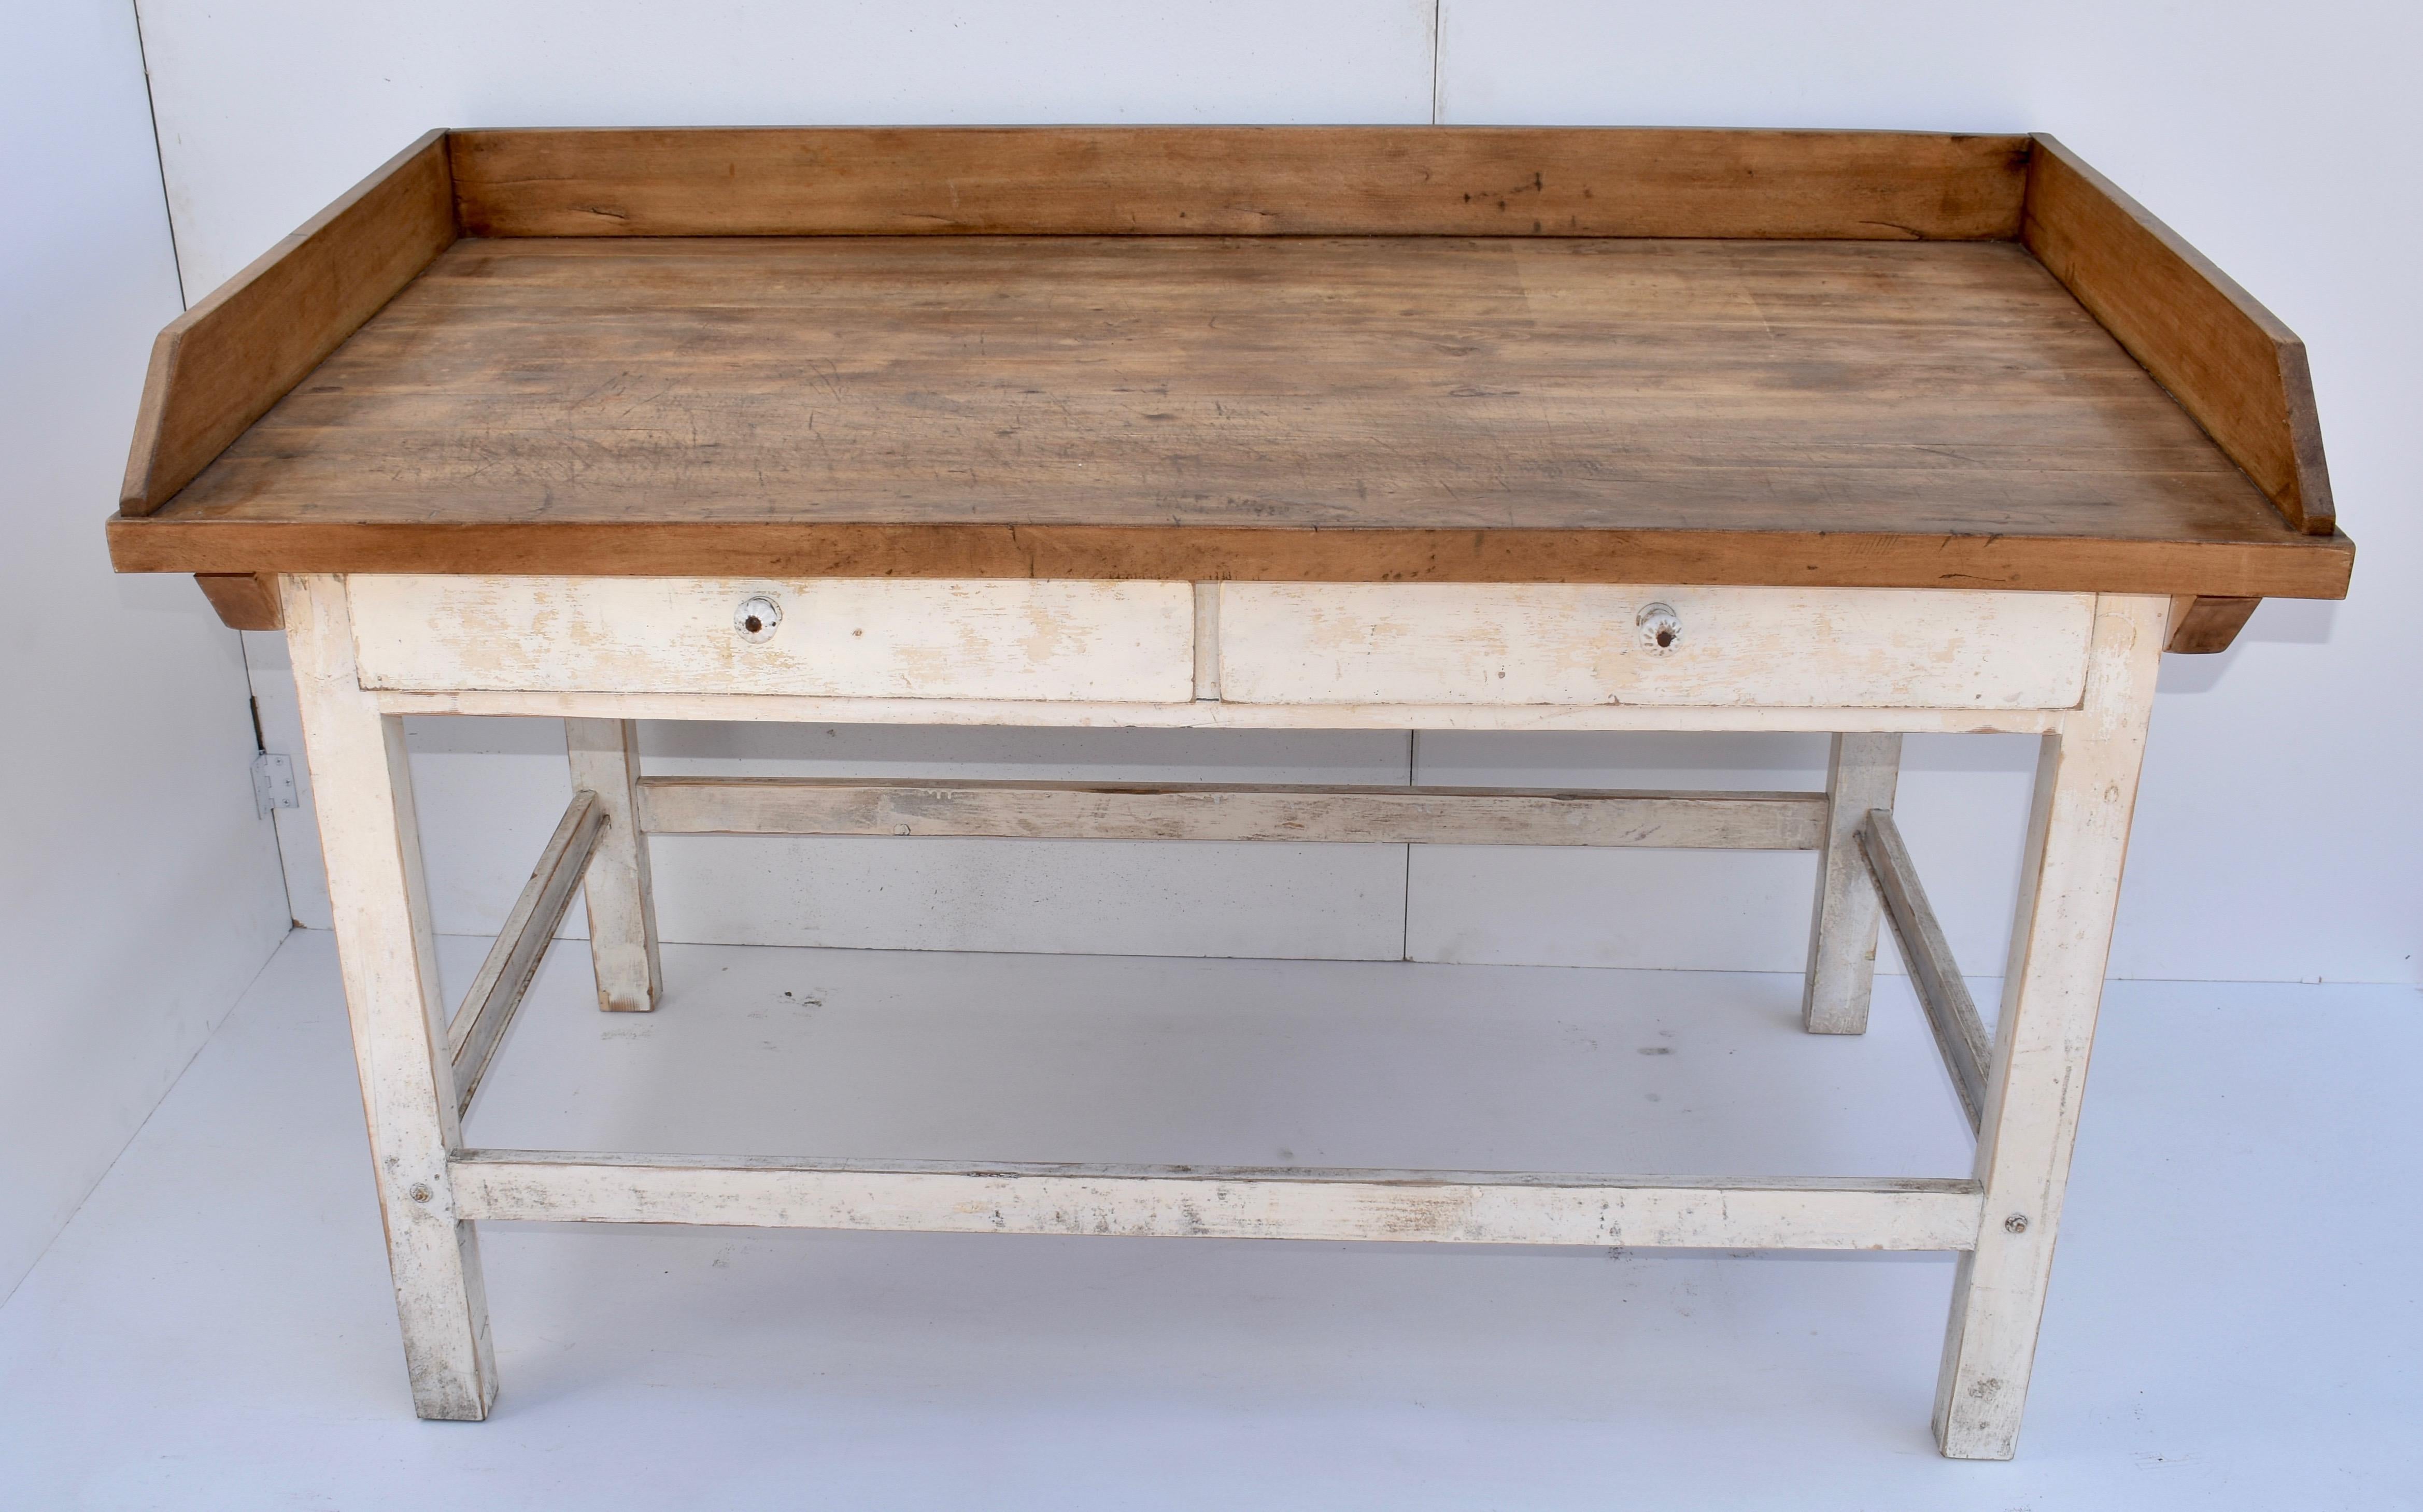 This sturdy work table has an oak top 1.5” thick with a 4” high gallery on three sides. It is pegged to a square-legged pine base through thick cleats attached to the underside. The base has well-worn stretchers all round and is finished in old worn